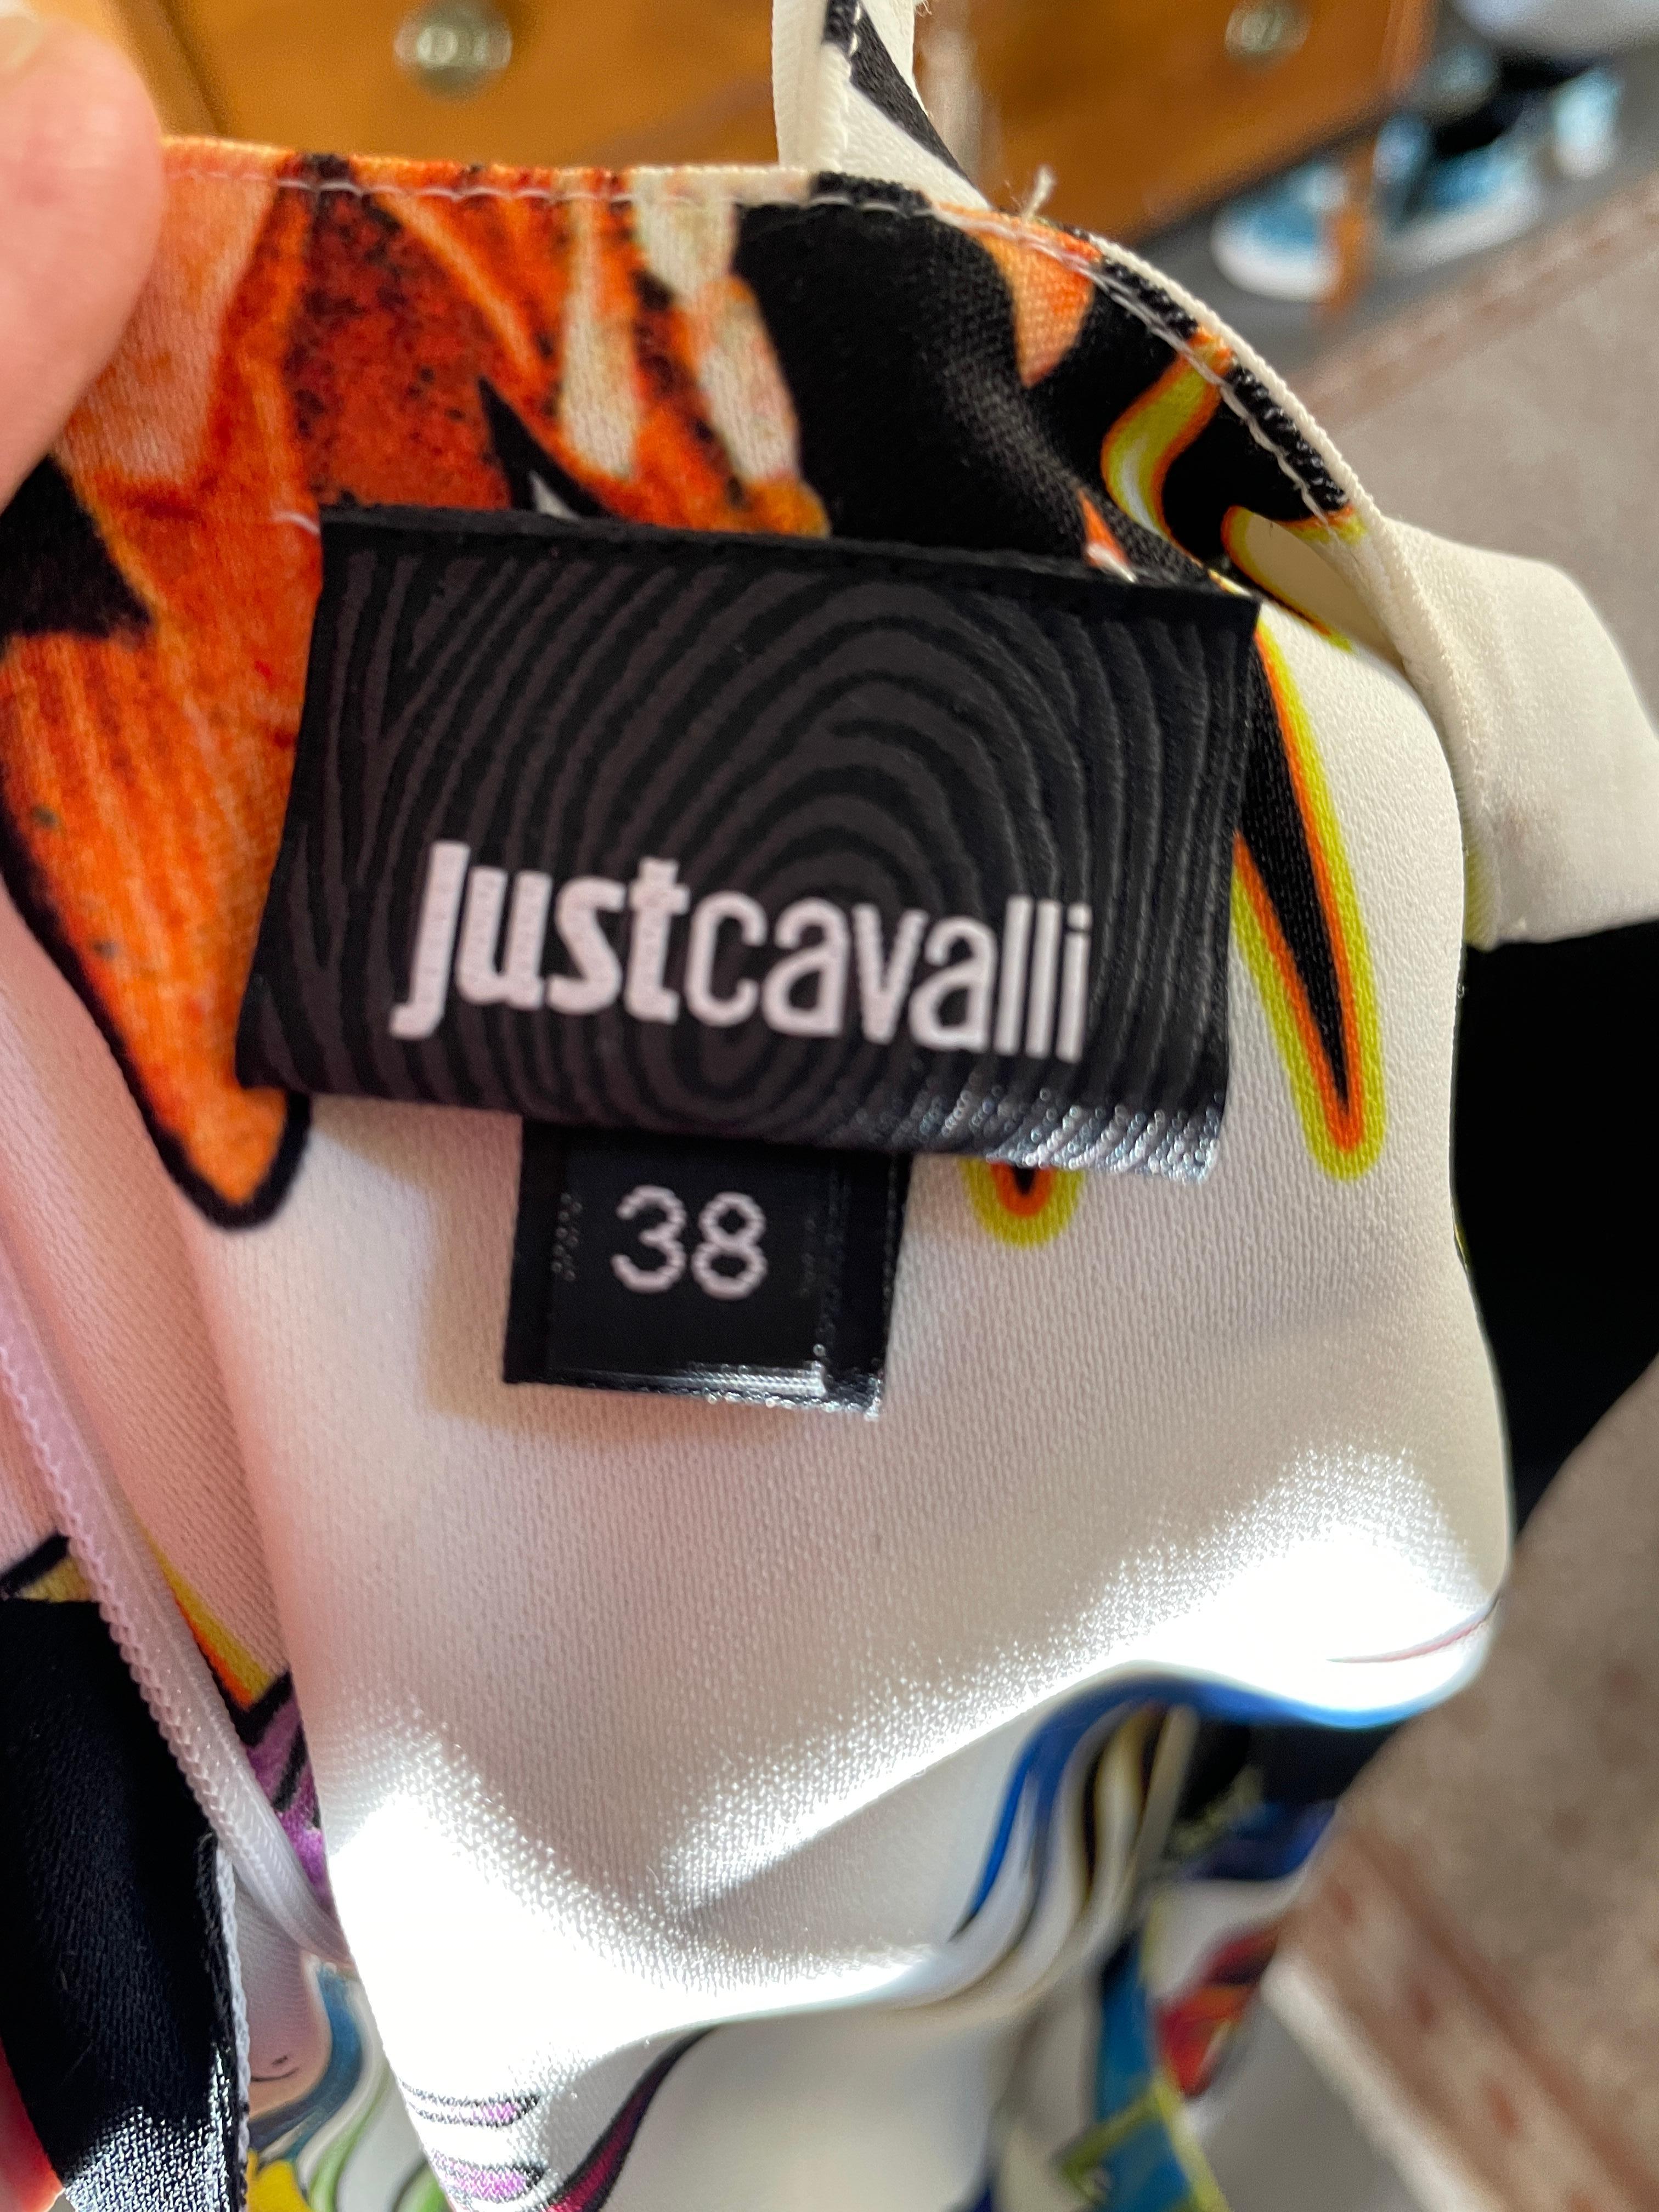 Just Cavalli Vintage Floral Cocktail Dress by Roberto Cavalli In Excellent Condition For Sale In Cloverdale, CA